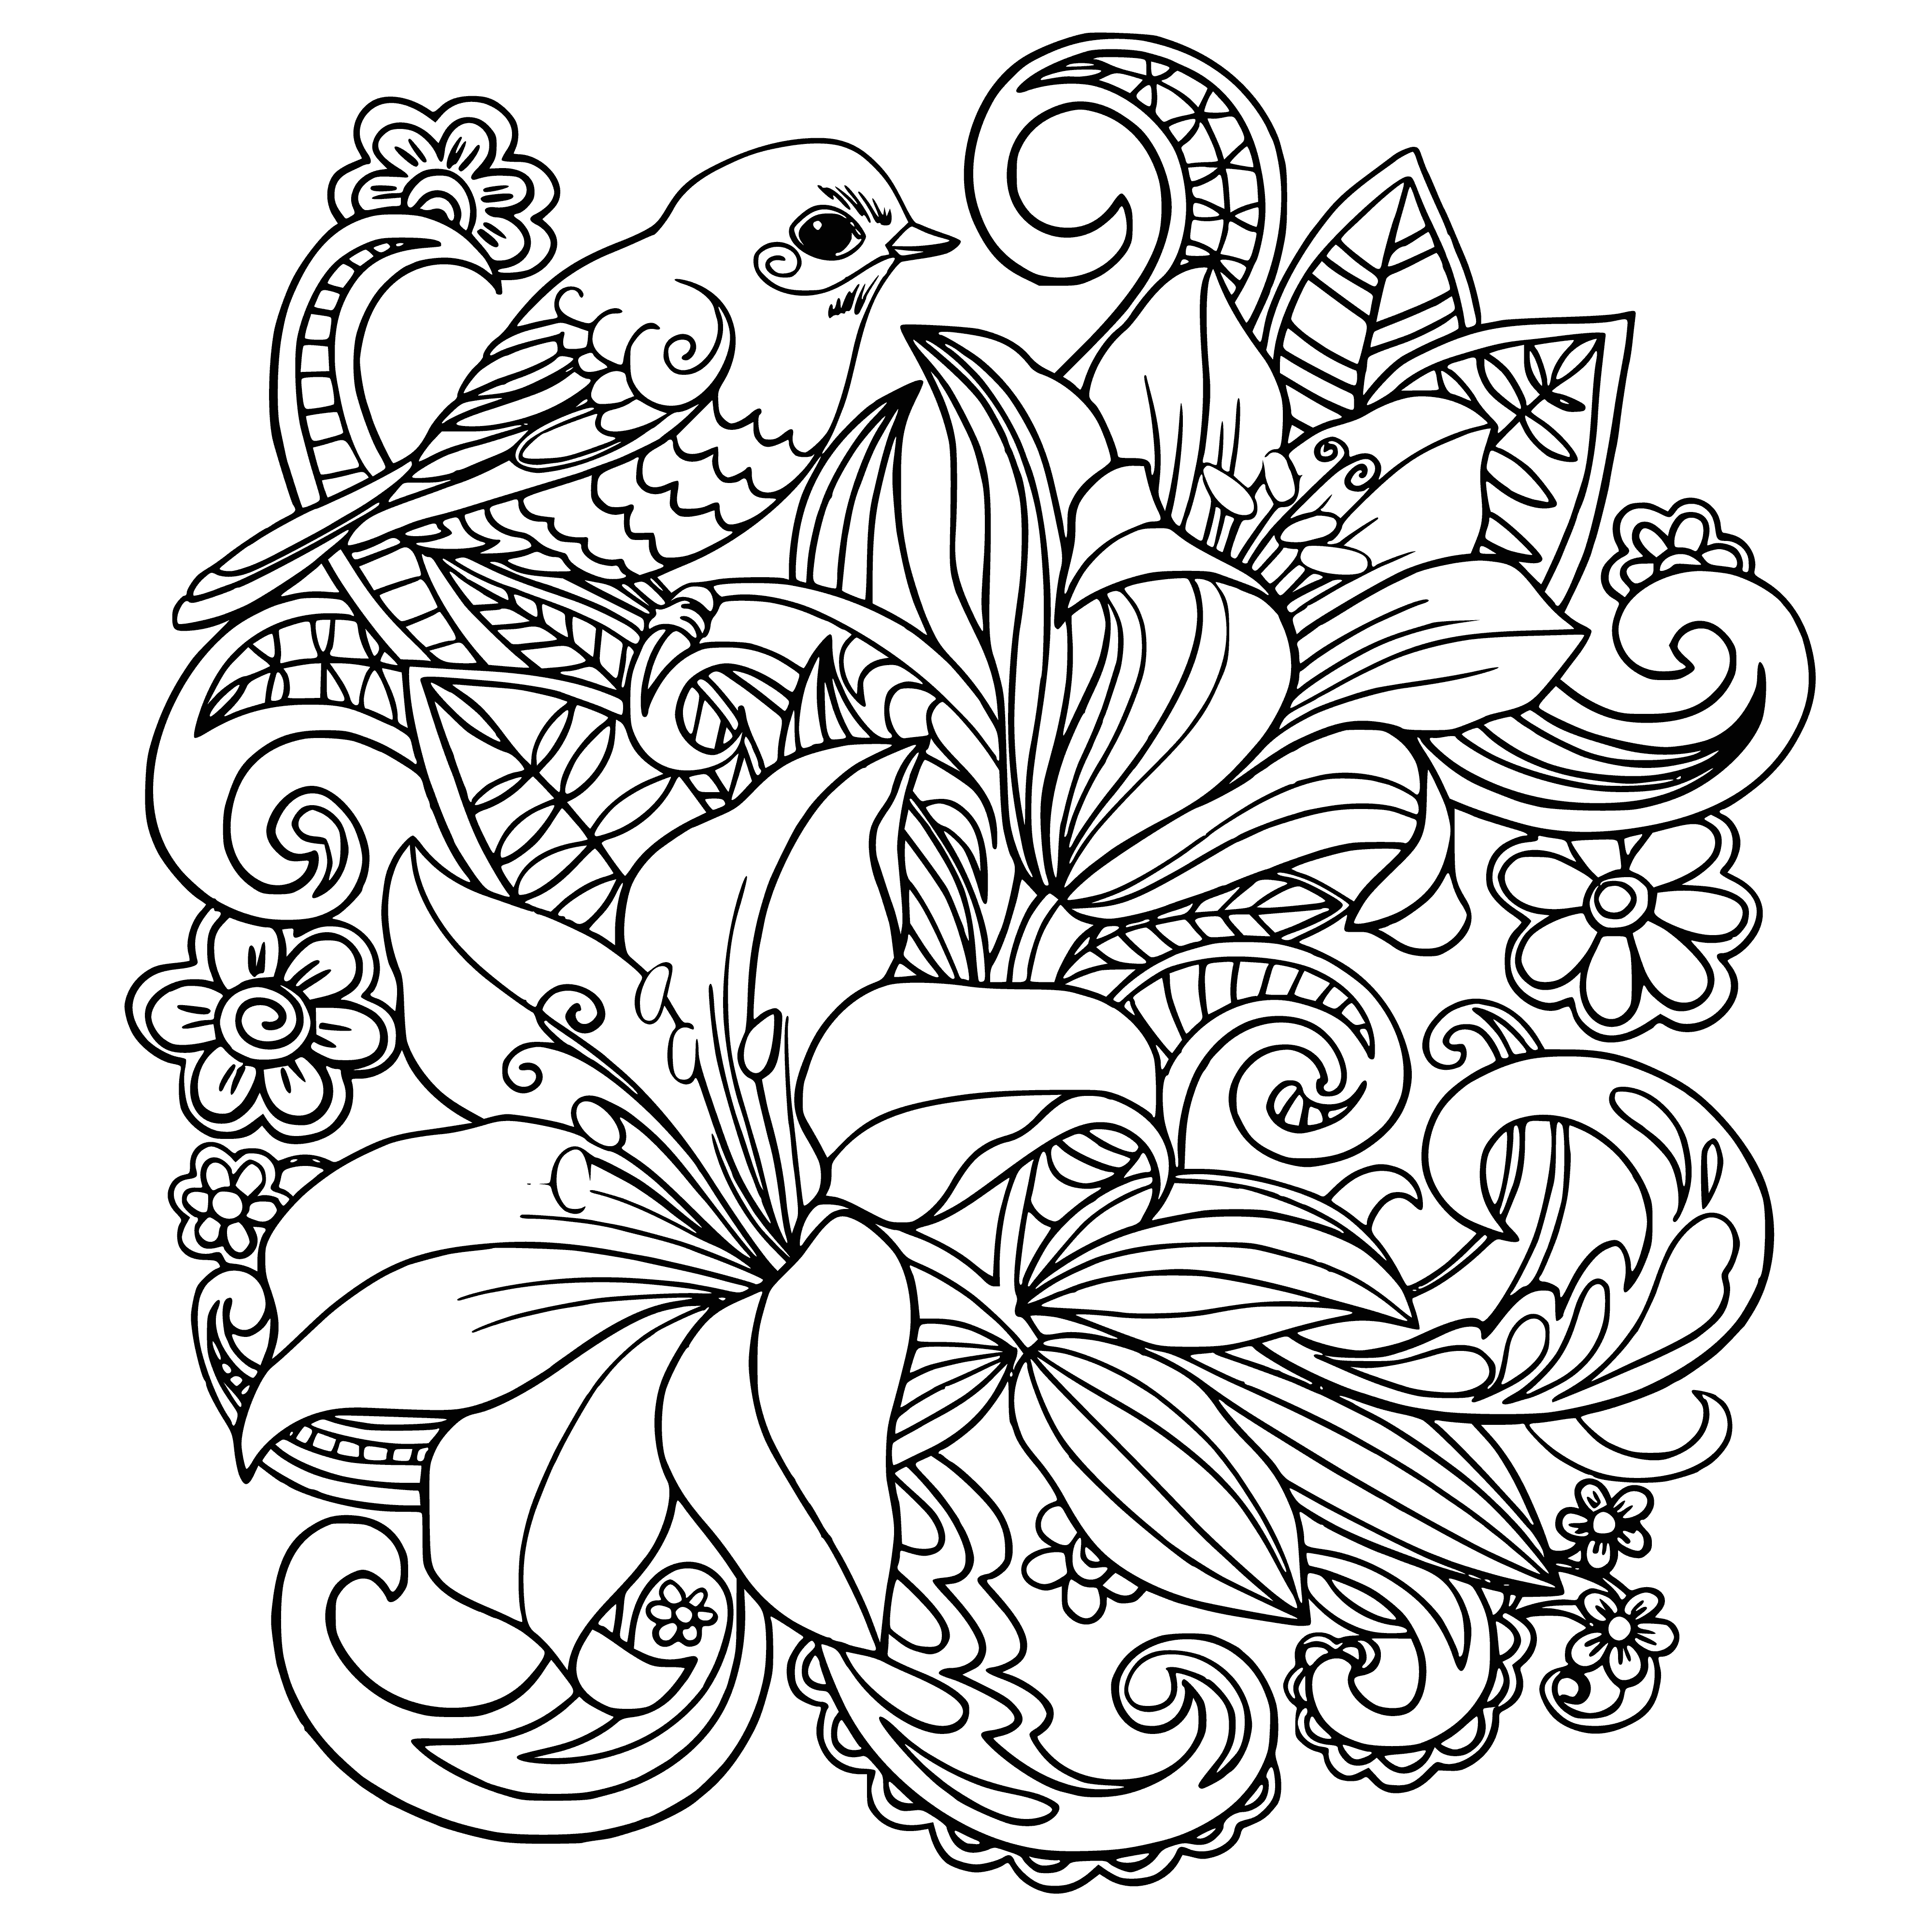 coloring page: Colorful lilies in full bloom, detailed petals & green wavy leaves. Perfect combo for relaxation & creativity! #adultcoloringpages #coloringflowers